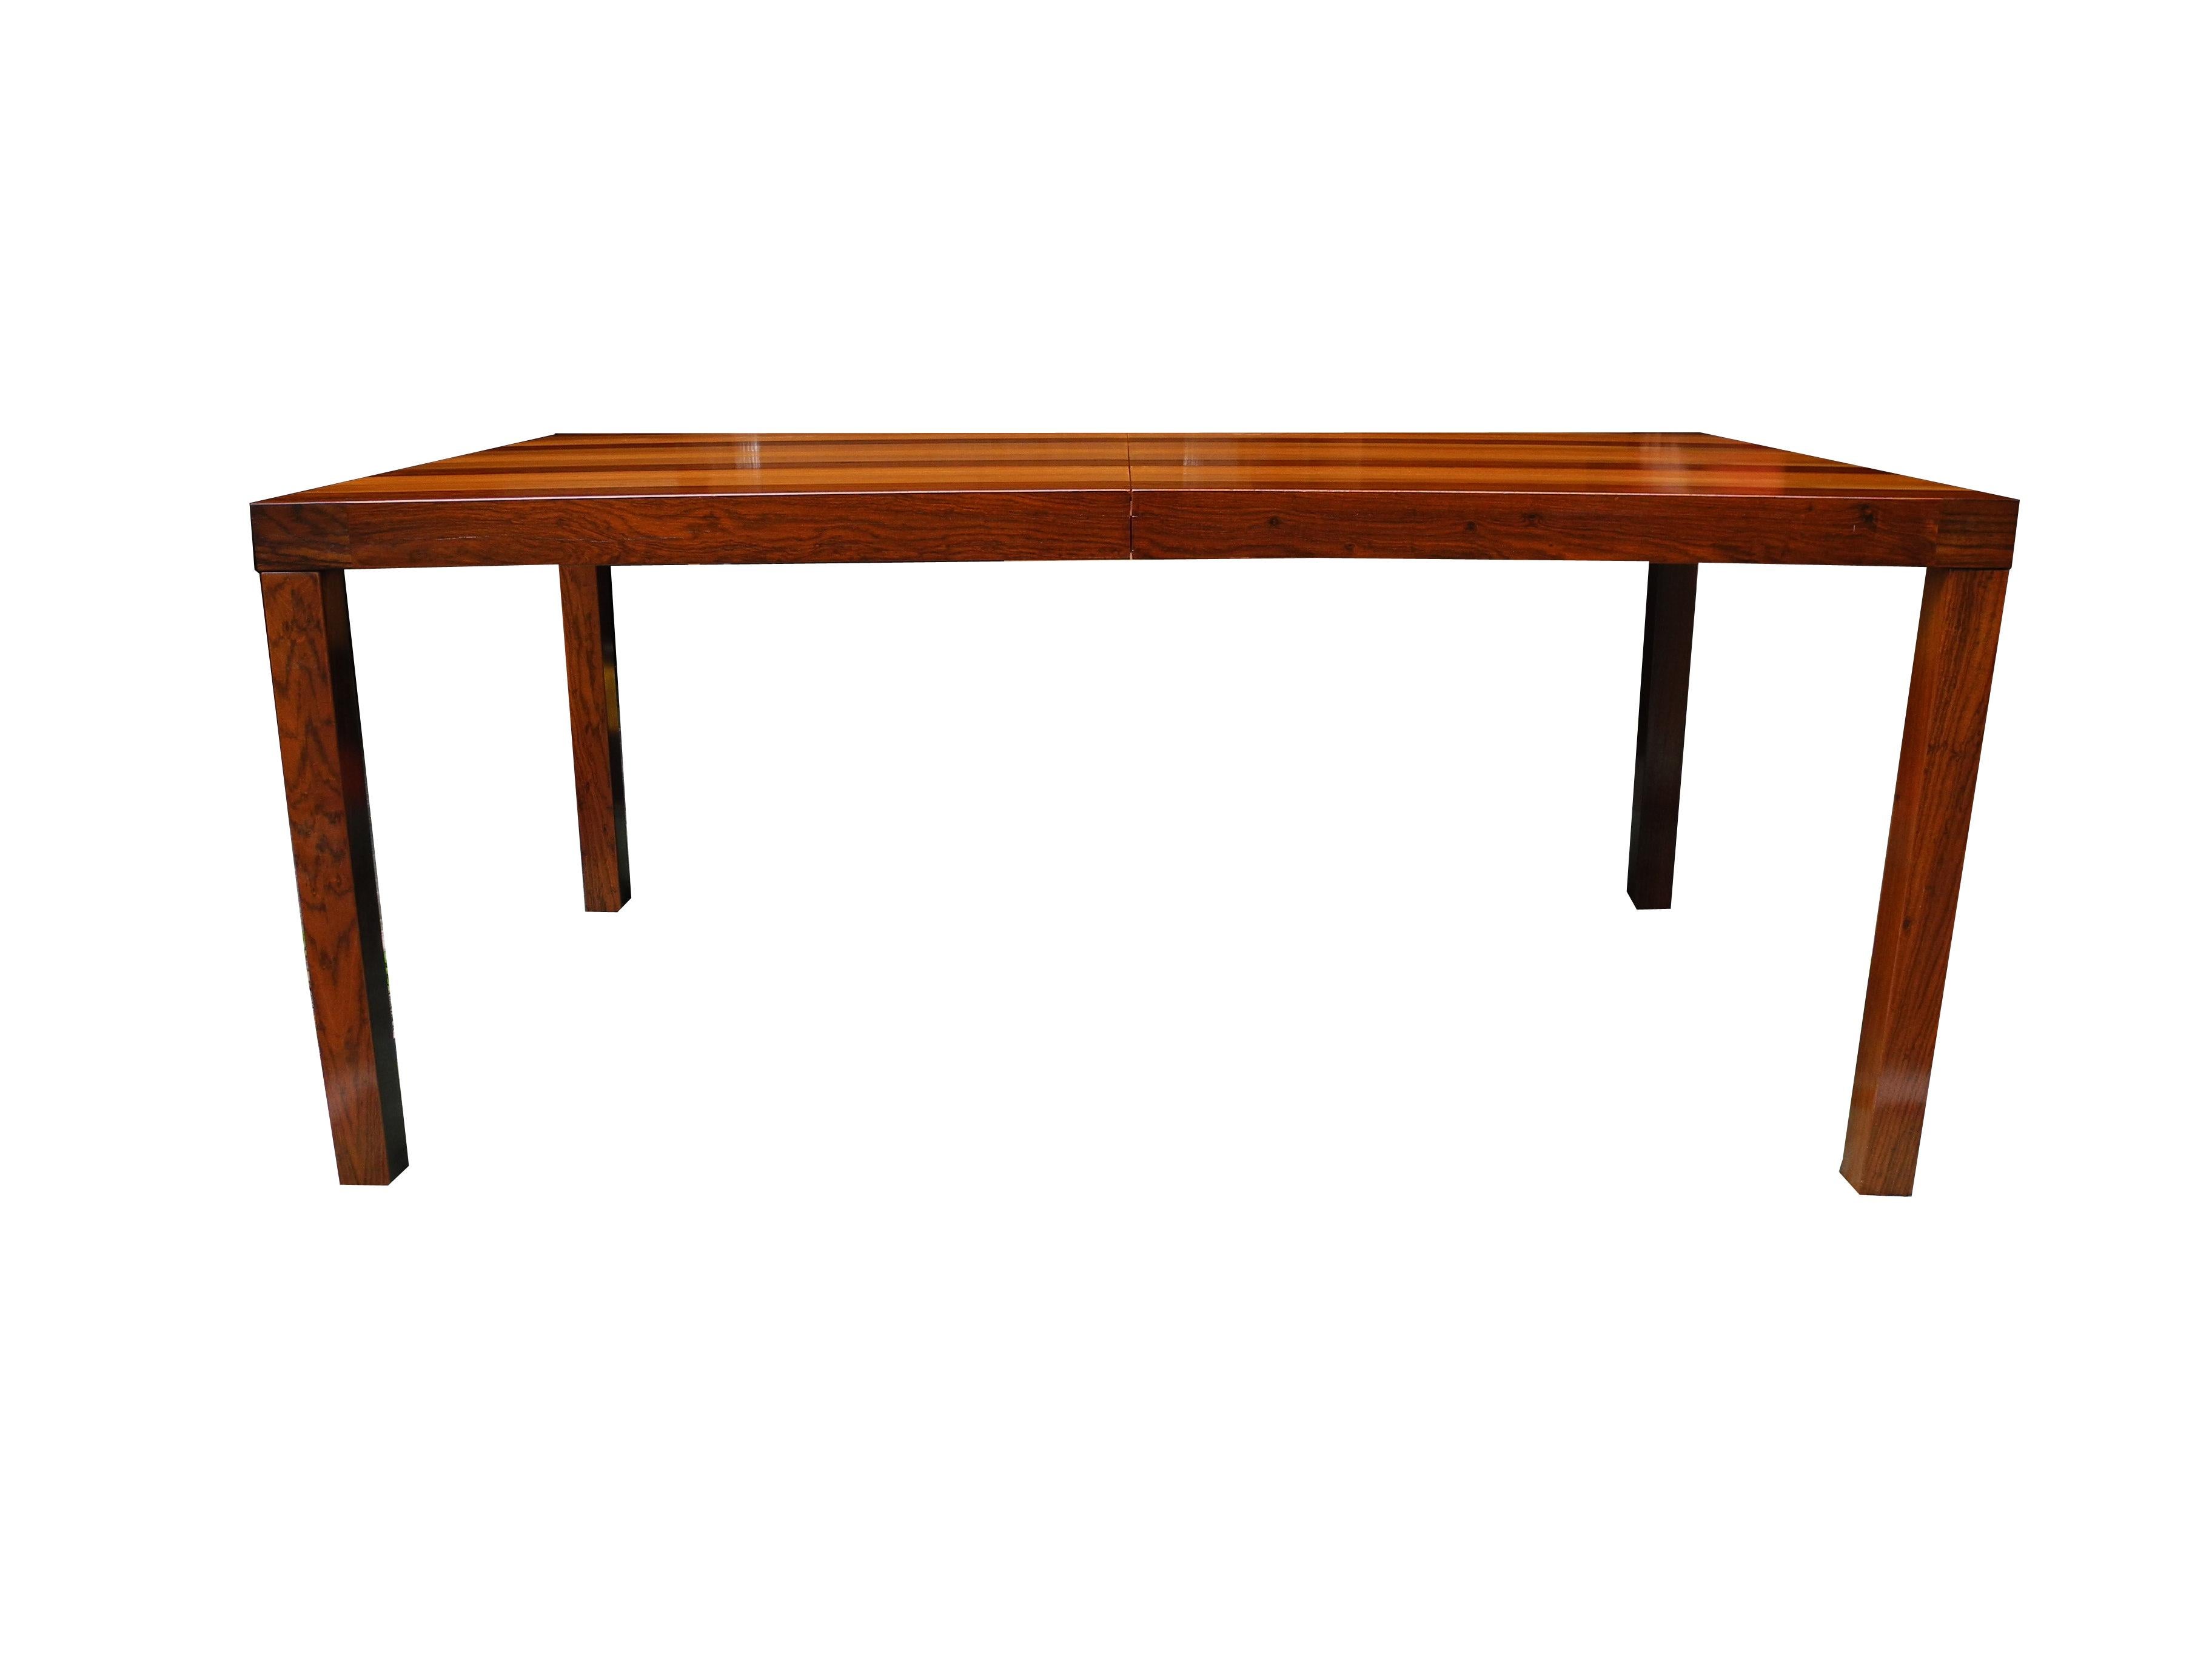 20th Century Mid-Century Modern Parson Striped Table by Milo Baughman in Three Woods For Sale